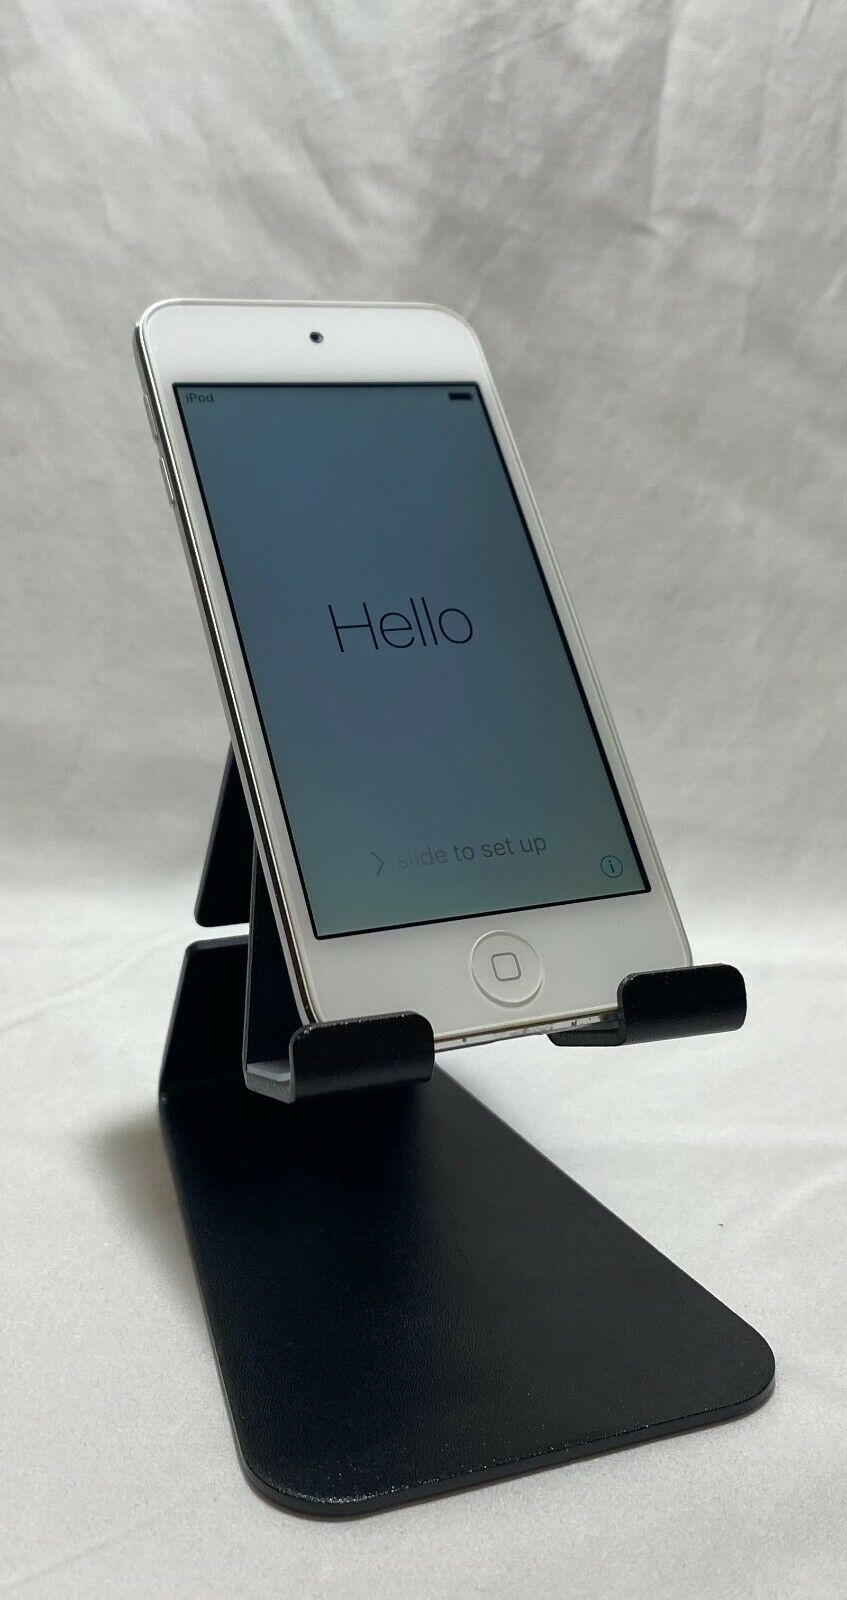 OFFicial site iPod Max 42% OFF Touch 5th Generation Excellent Condition